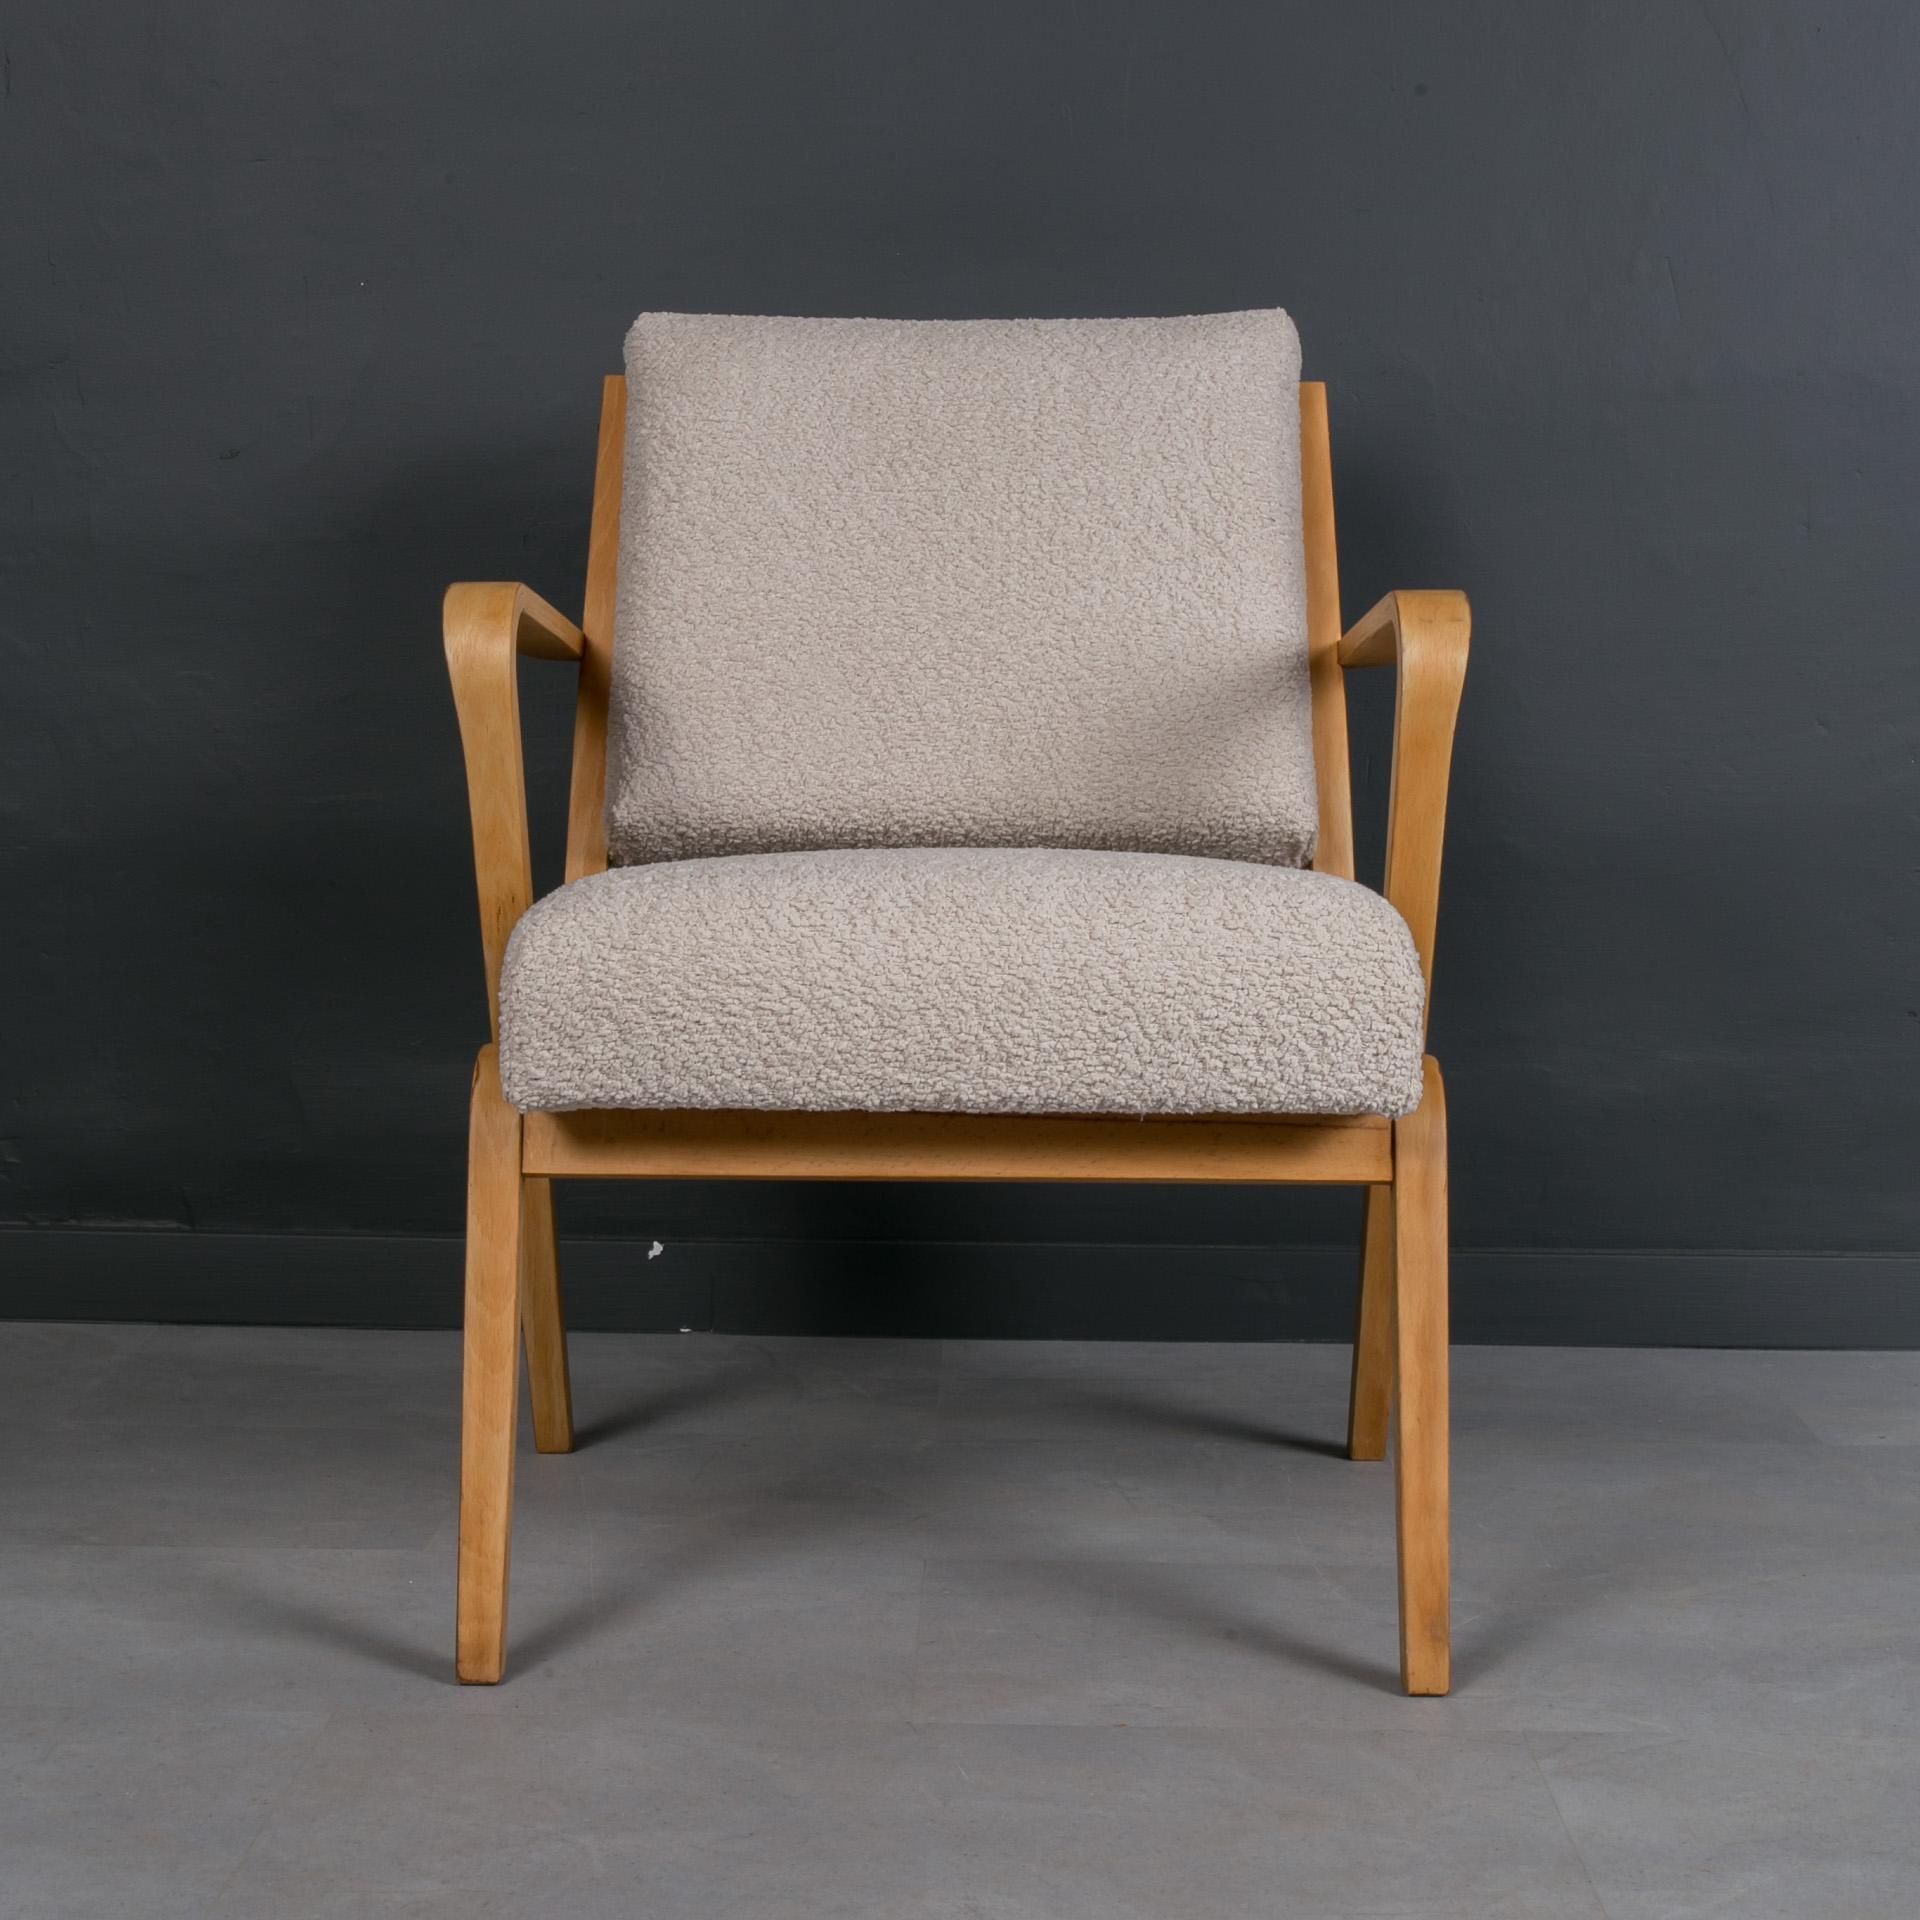 Oiled Set of Two Lounge Chairs by S. Selmanagić, 1960s, Reupholstered in Creamy Boucle For Sale